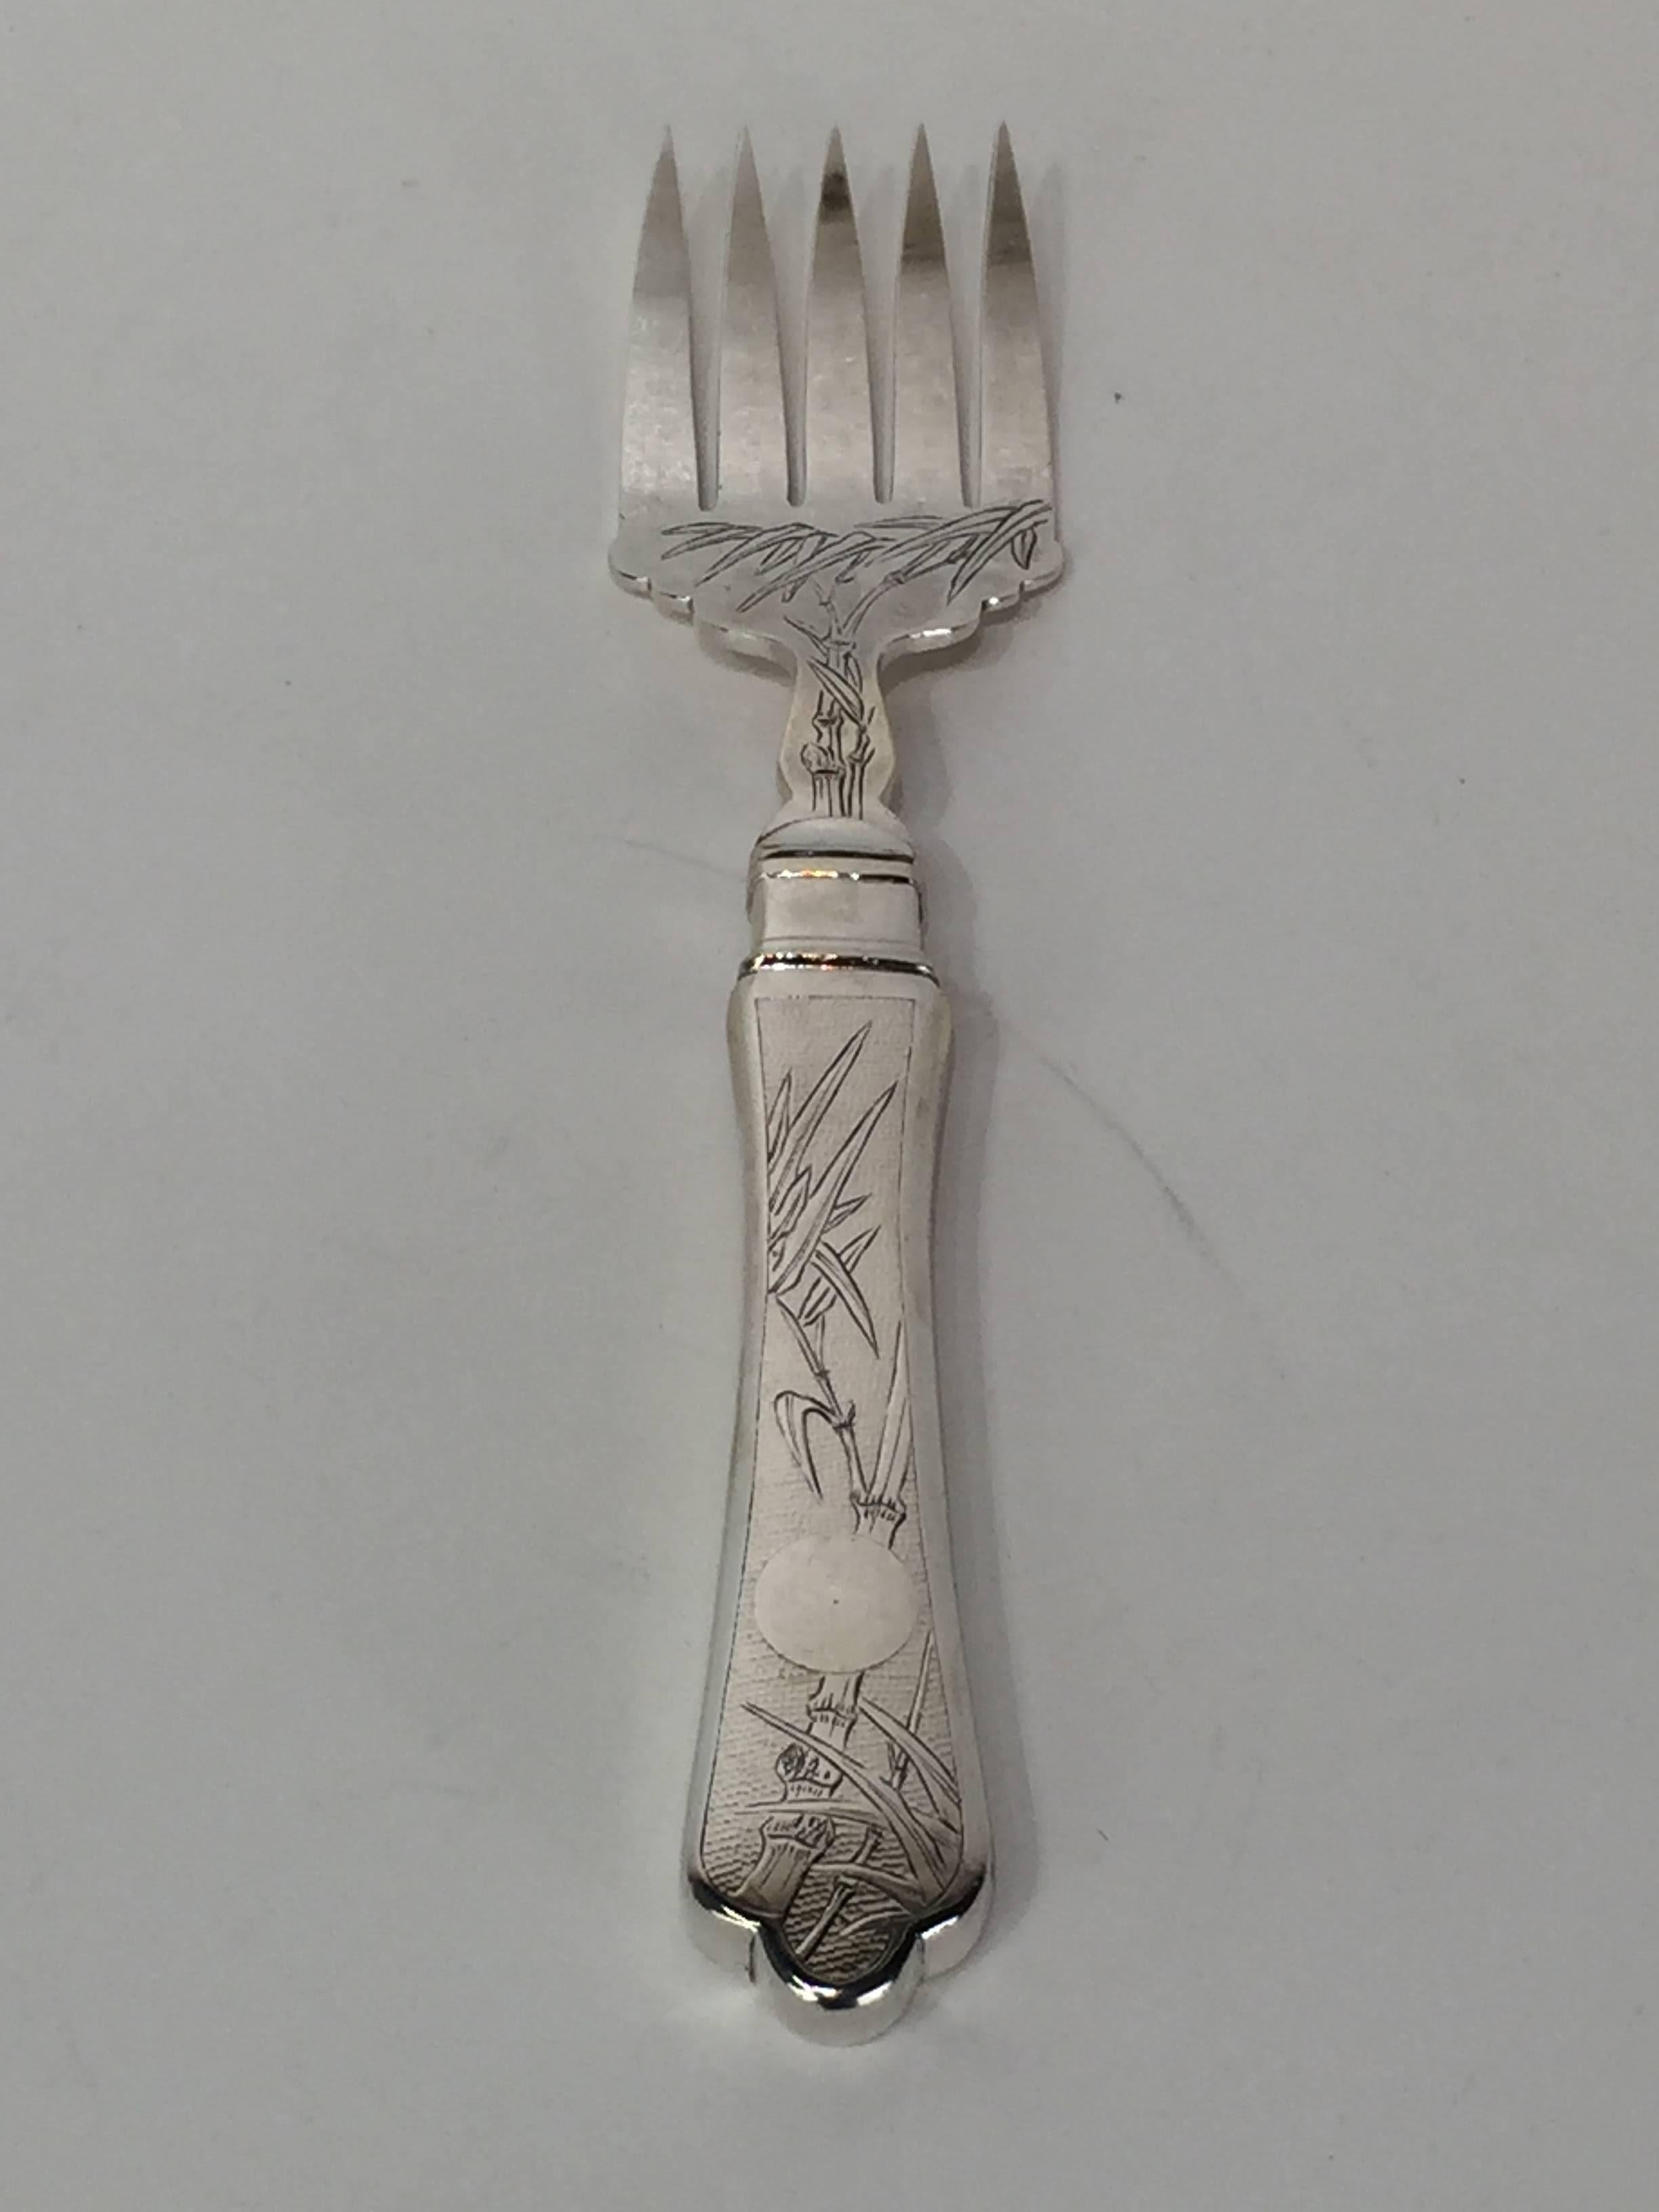 Heavy Chinese export silver salad set, each one engraved with bamboo and moon motif, Hallmarked Siu Kee, Hong Kong, solid sterling total weight of 12.3 troy ounces.
Knife measures 12.5" W x 2.25" H x 5" D.
Fork measures 10" LW x